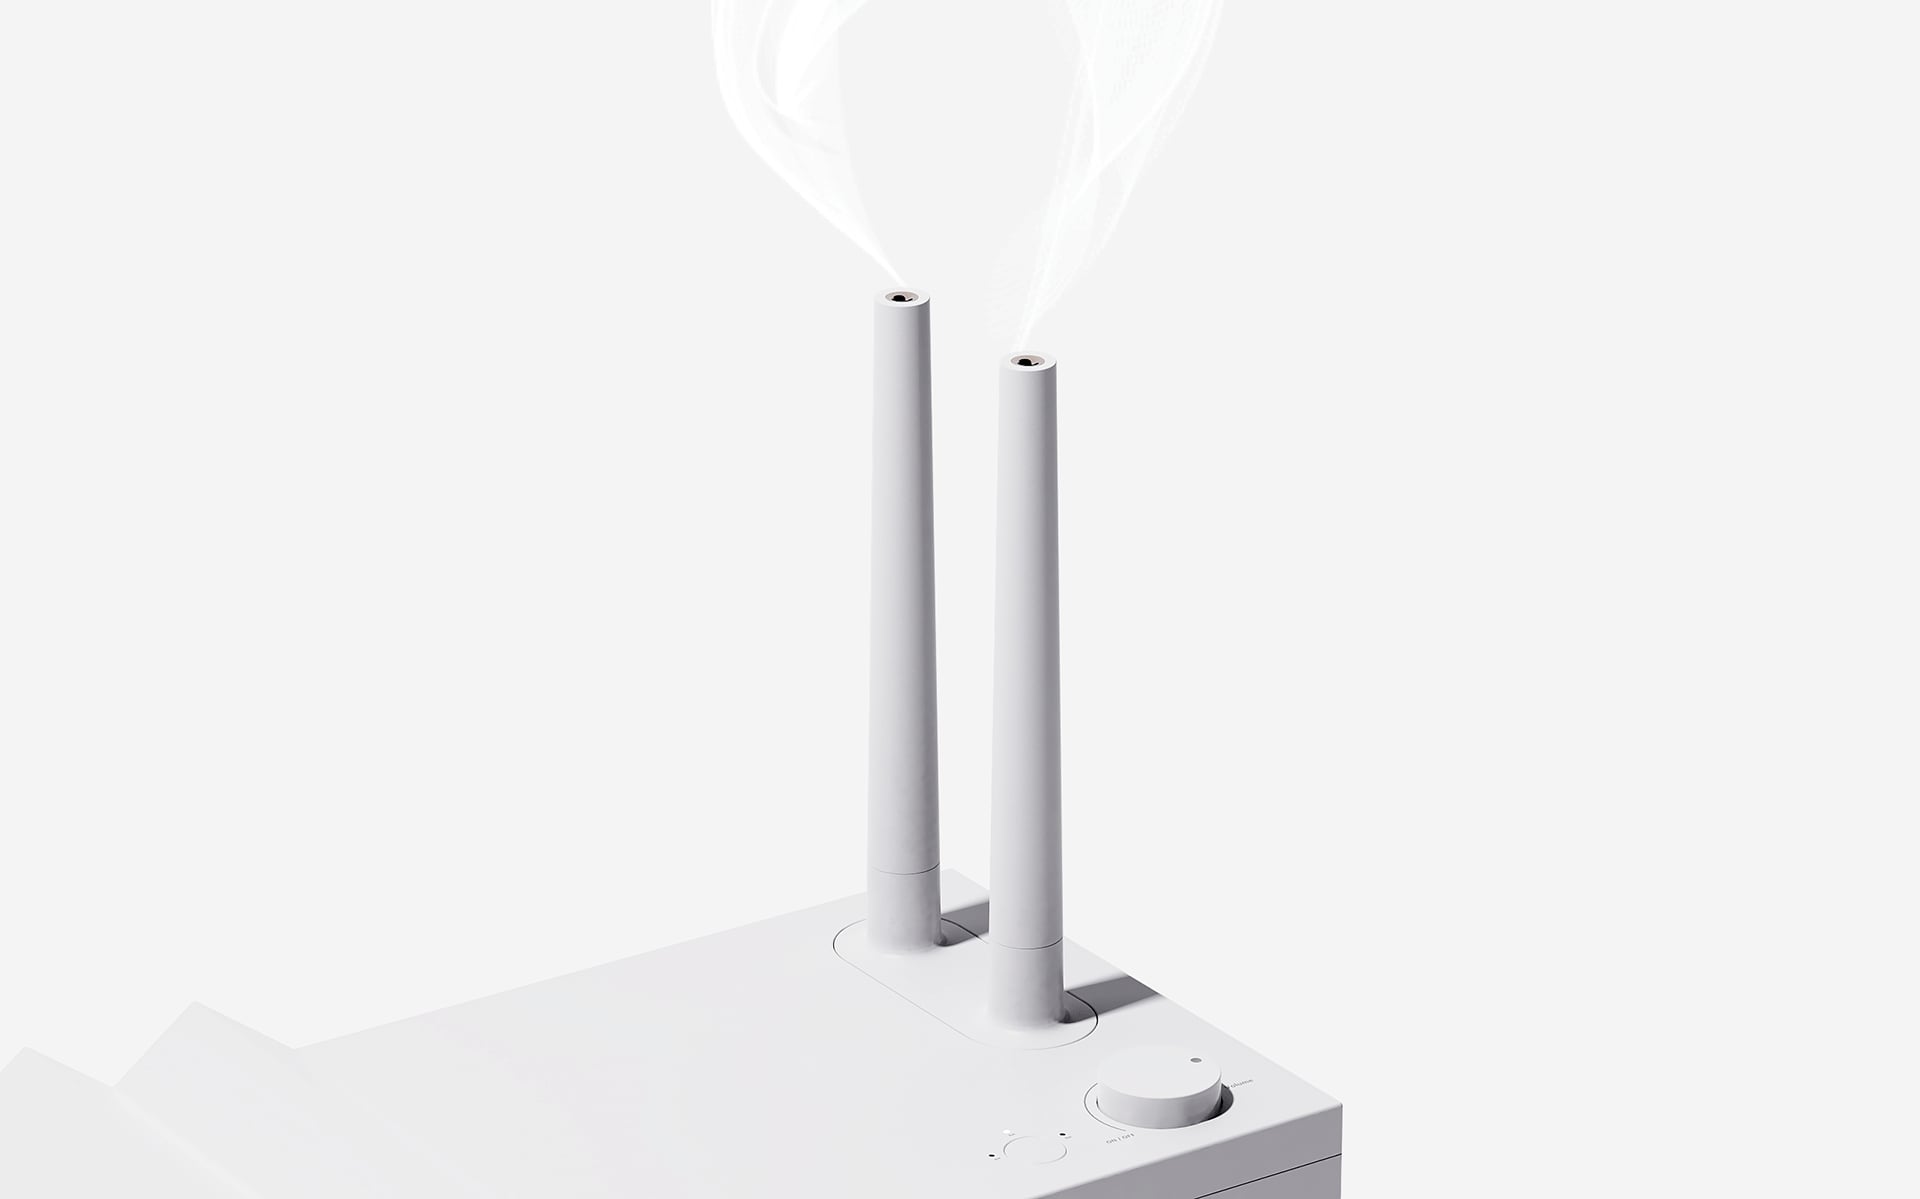 Factory Objects - humidifier